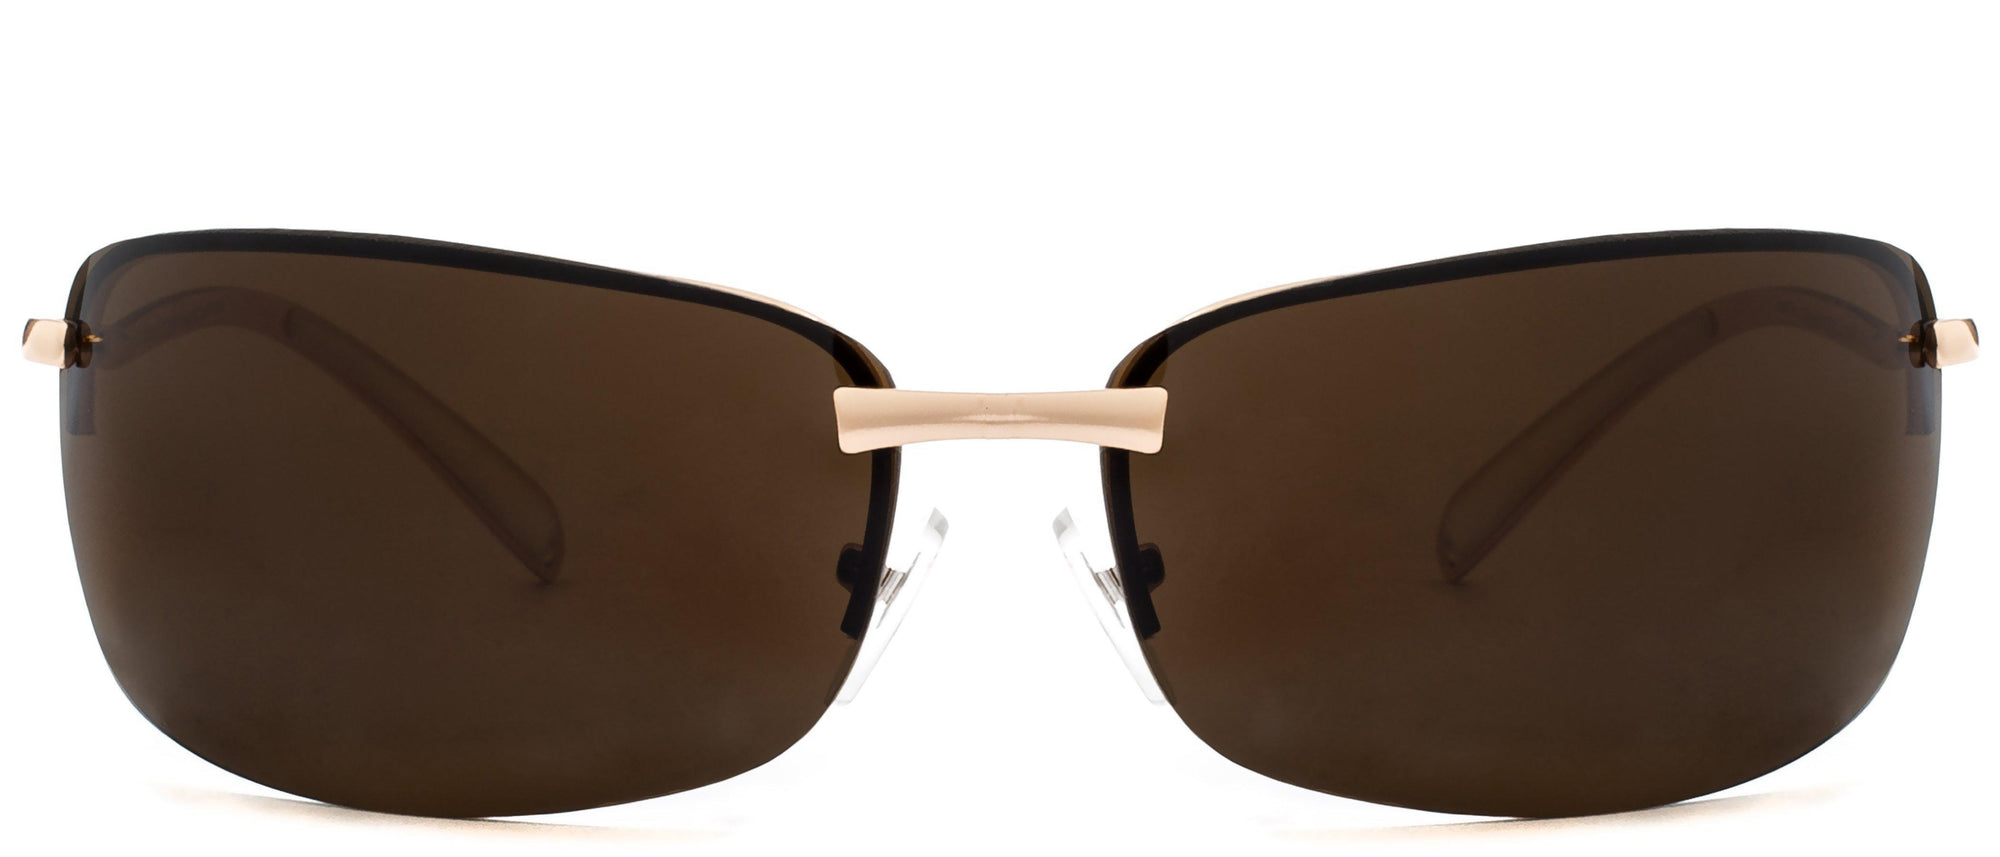 Franklin Square - Sunglasses NYS Collection Eyewear Brown/Gold